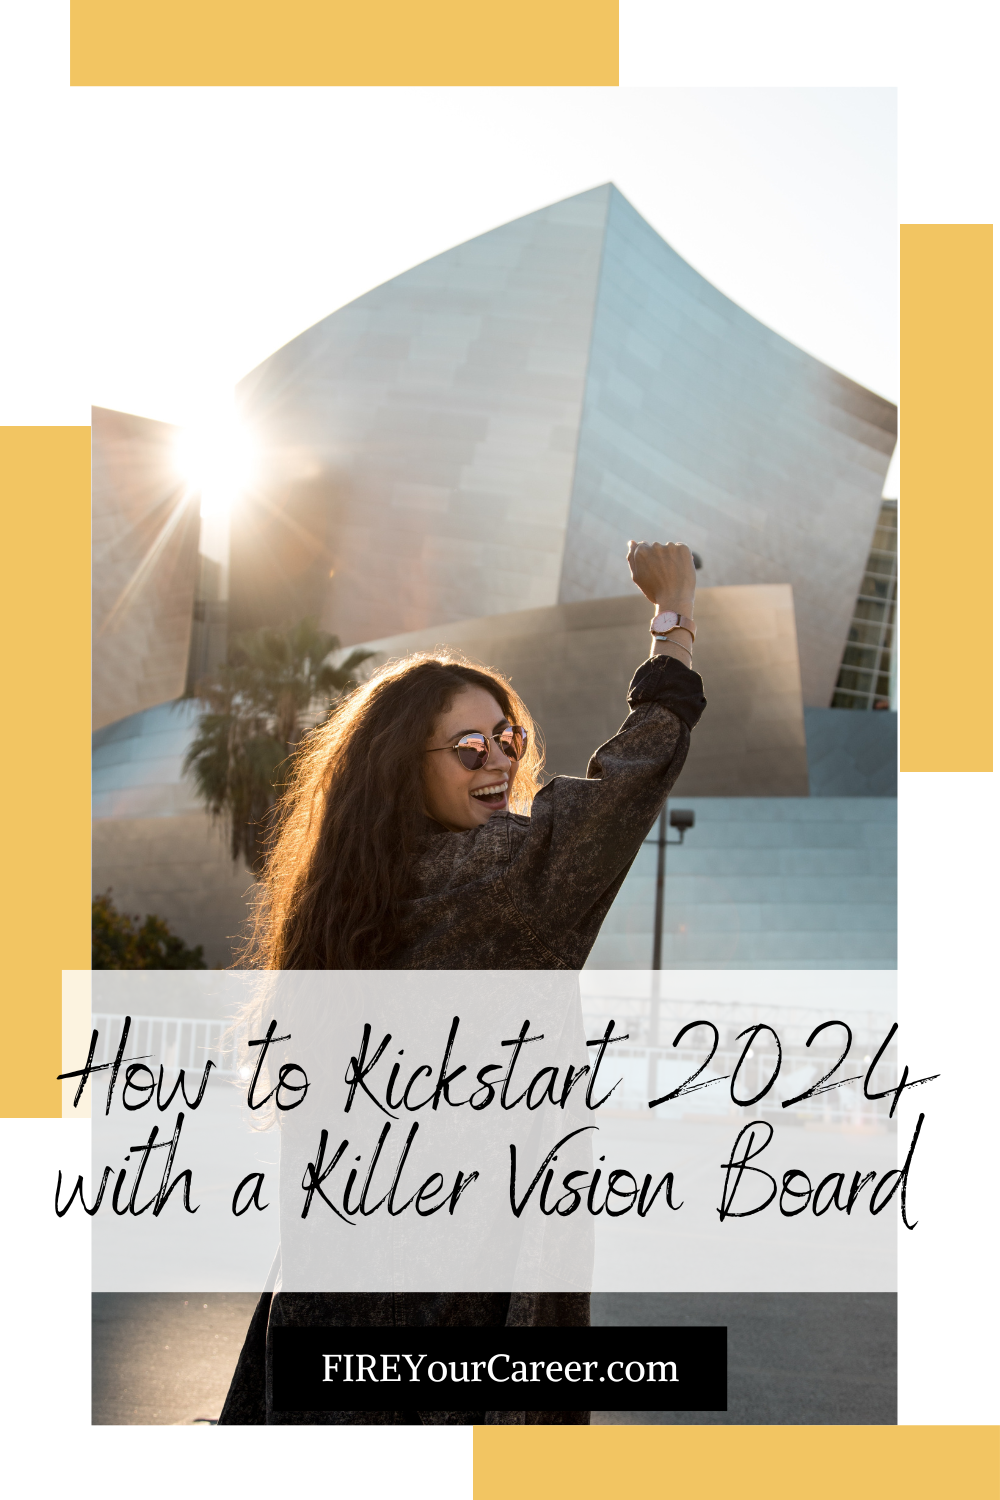 How to Kickstart 2024 with a Killer Vision Board Pinterest